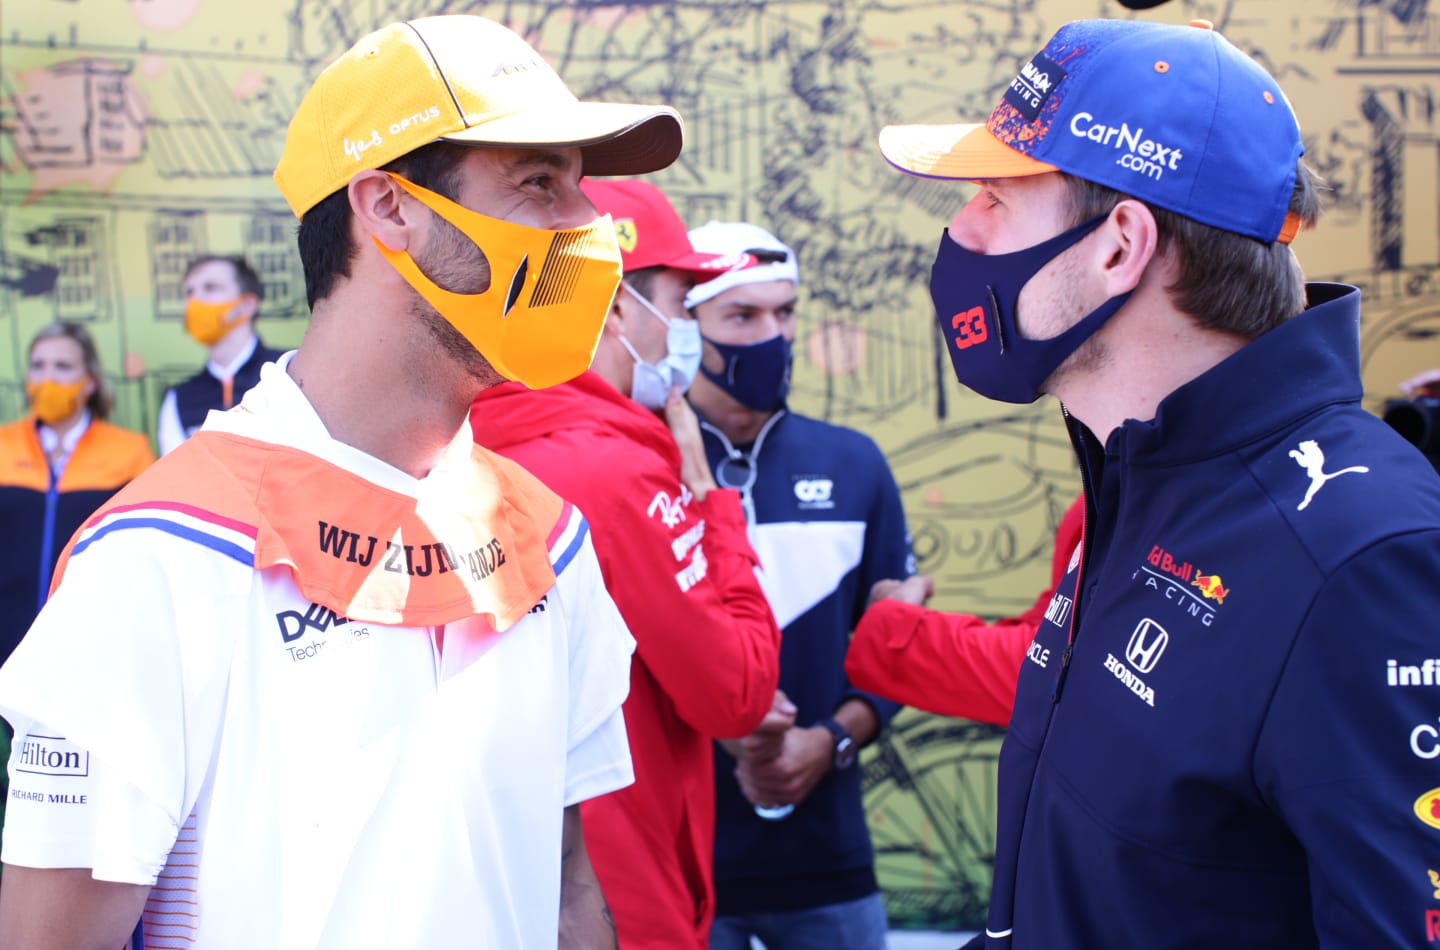 ZANDVOORT, NETHERLANDS - SEPTEMBER 05: Max Verstappen of Netherlands and Red Bull Racing and Daniel Ricciardo of Australia and McLaren F1 talk on the drivers parade ahead of the F1 Grand Prix of The Netherlands at Circuit Zandvoort on September 05, 2021 in Zandvoort, Netherlands. (Photo by Peter Fox/Getty Images)